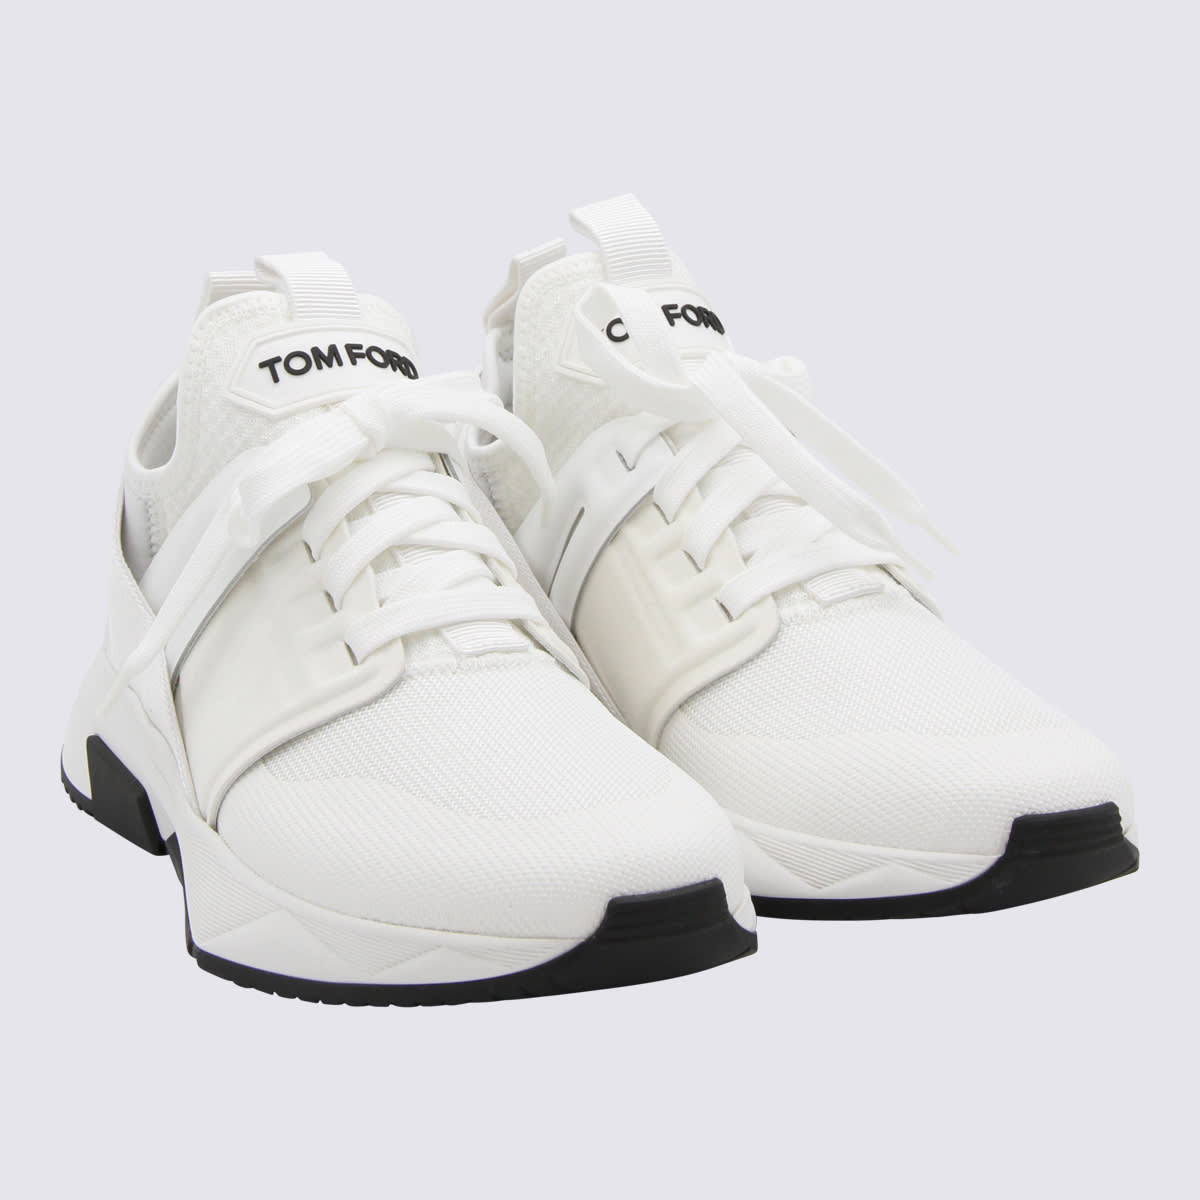 Tom Ford White Tech Jago Sneakers